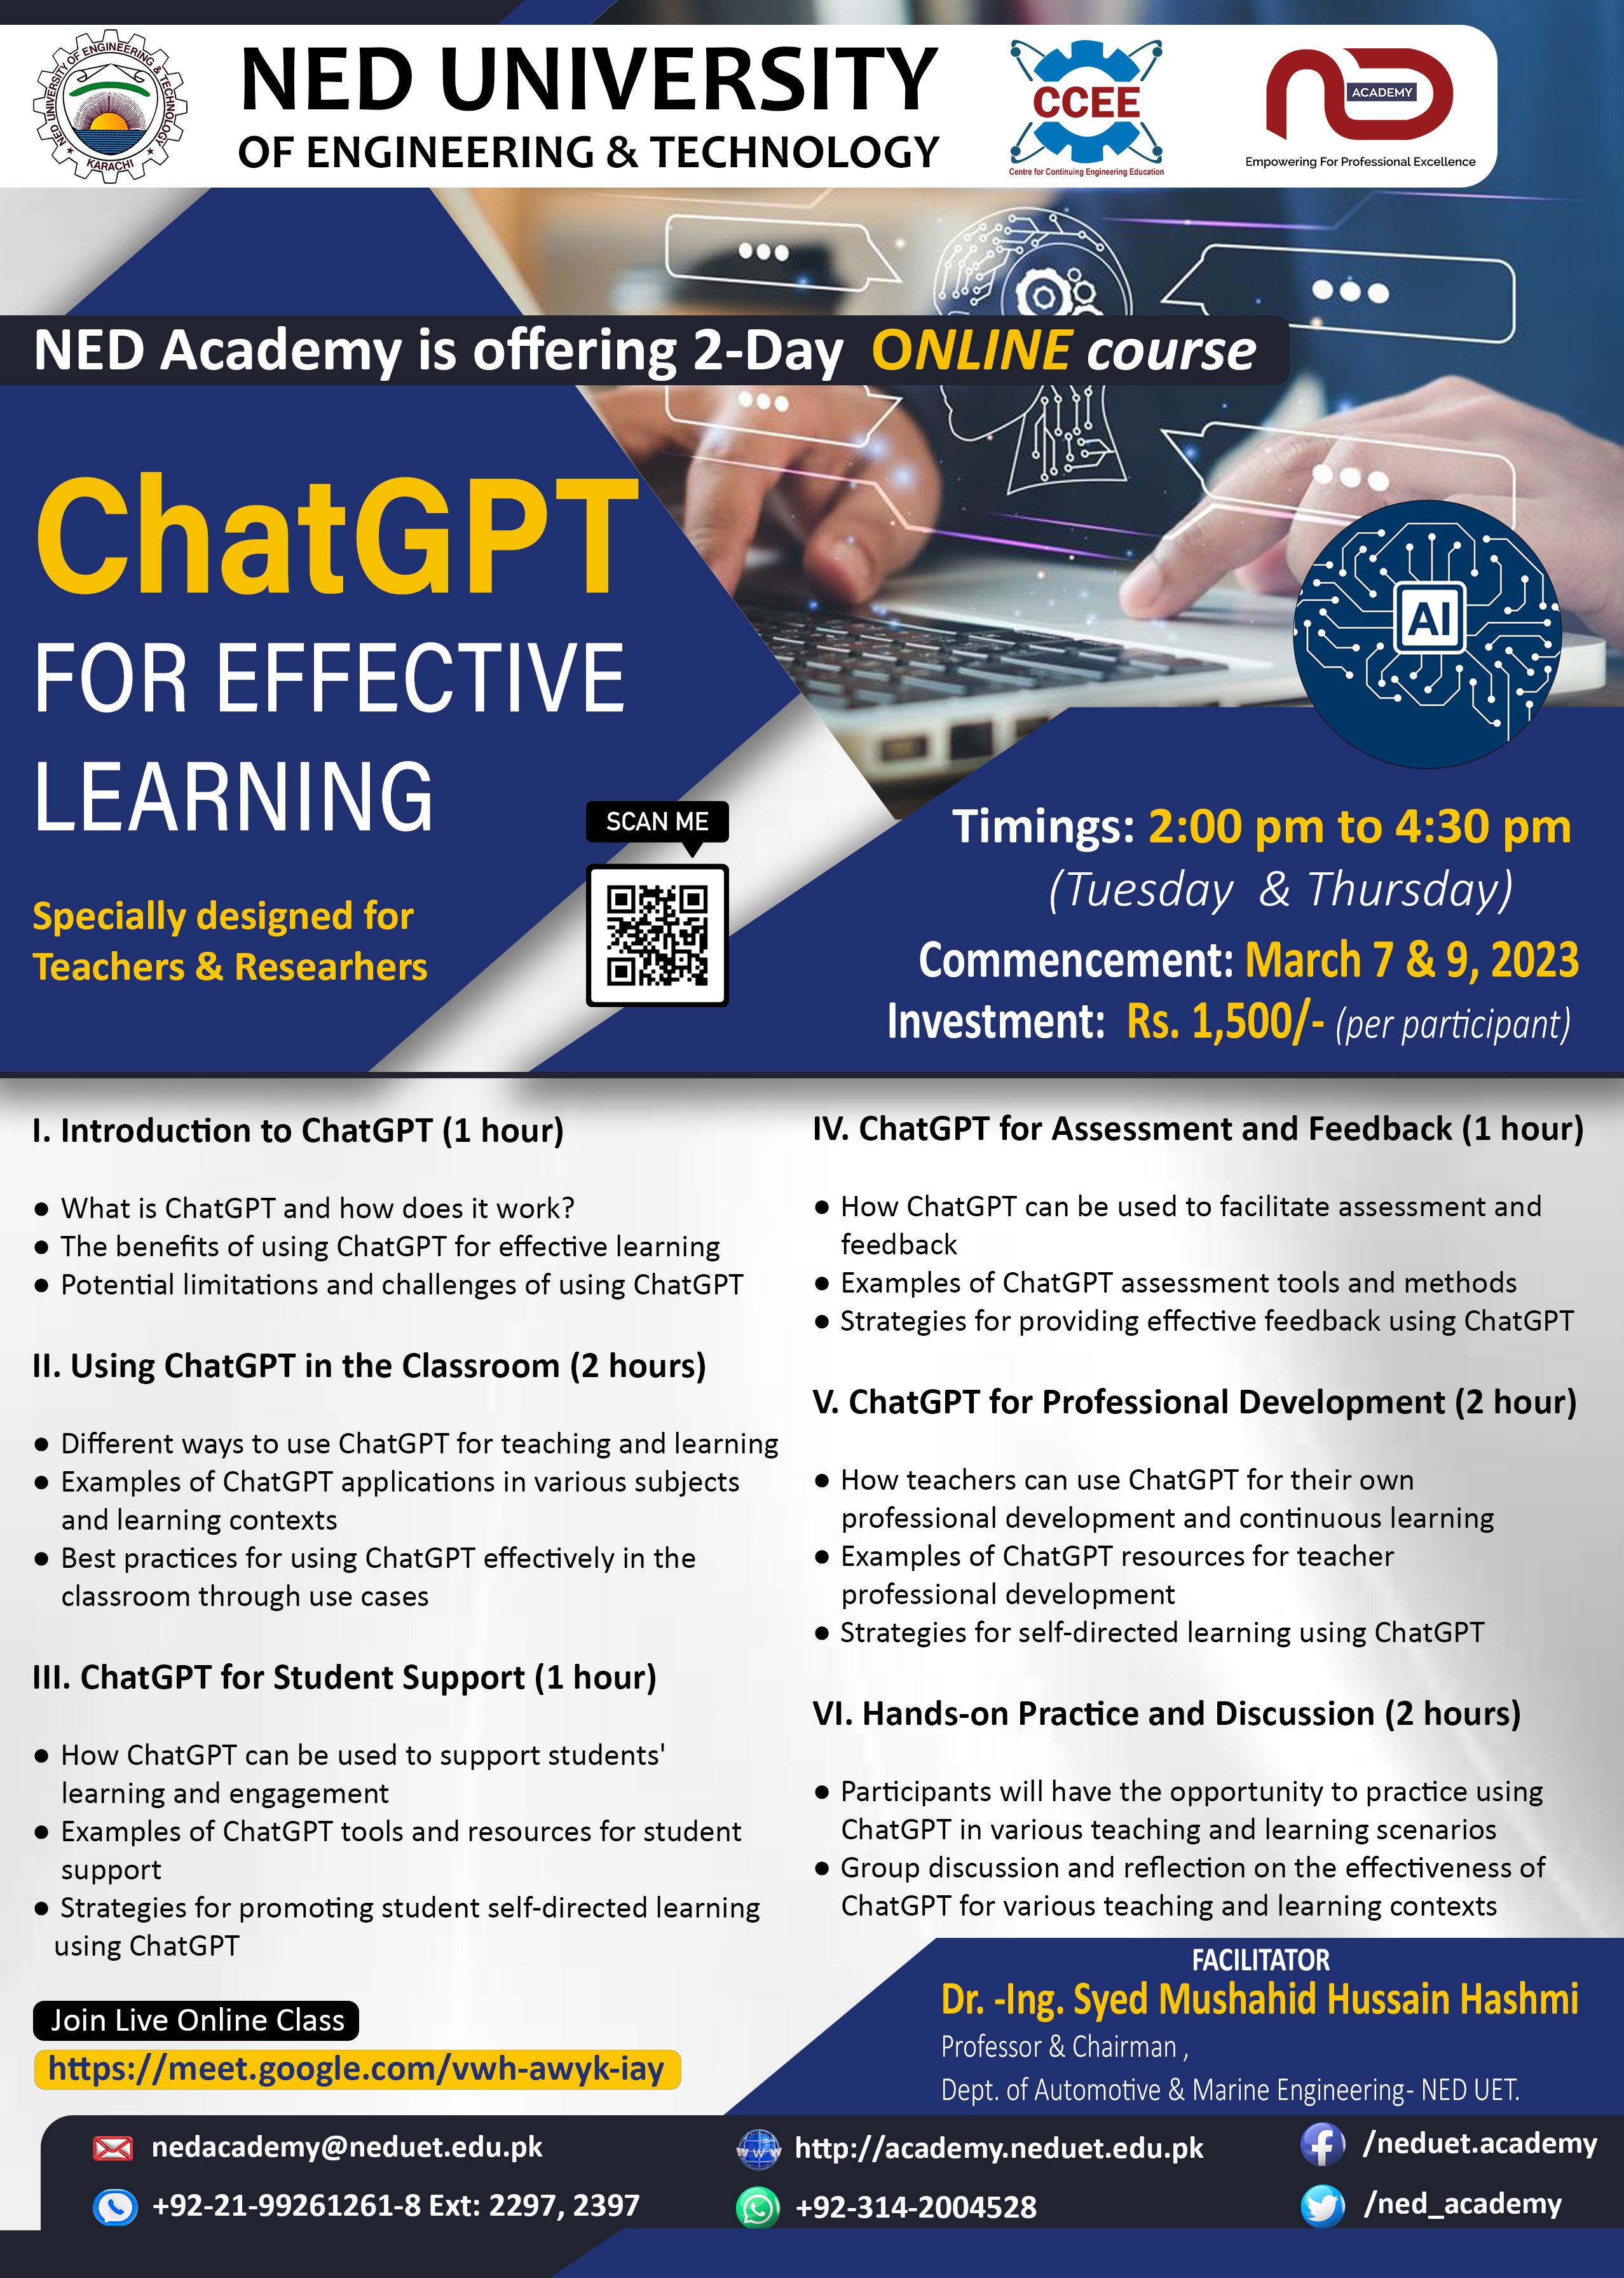 ChatGPT for effective learning